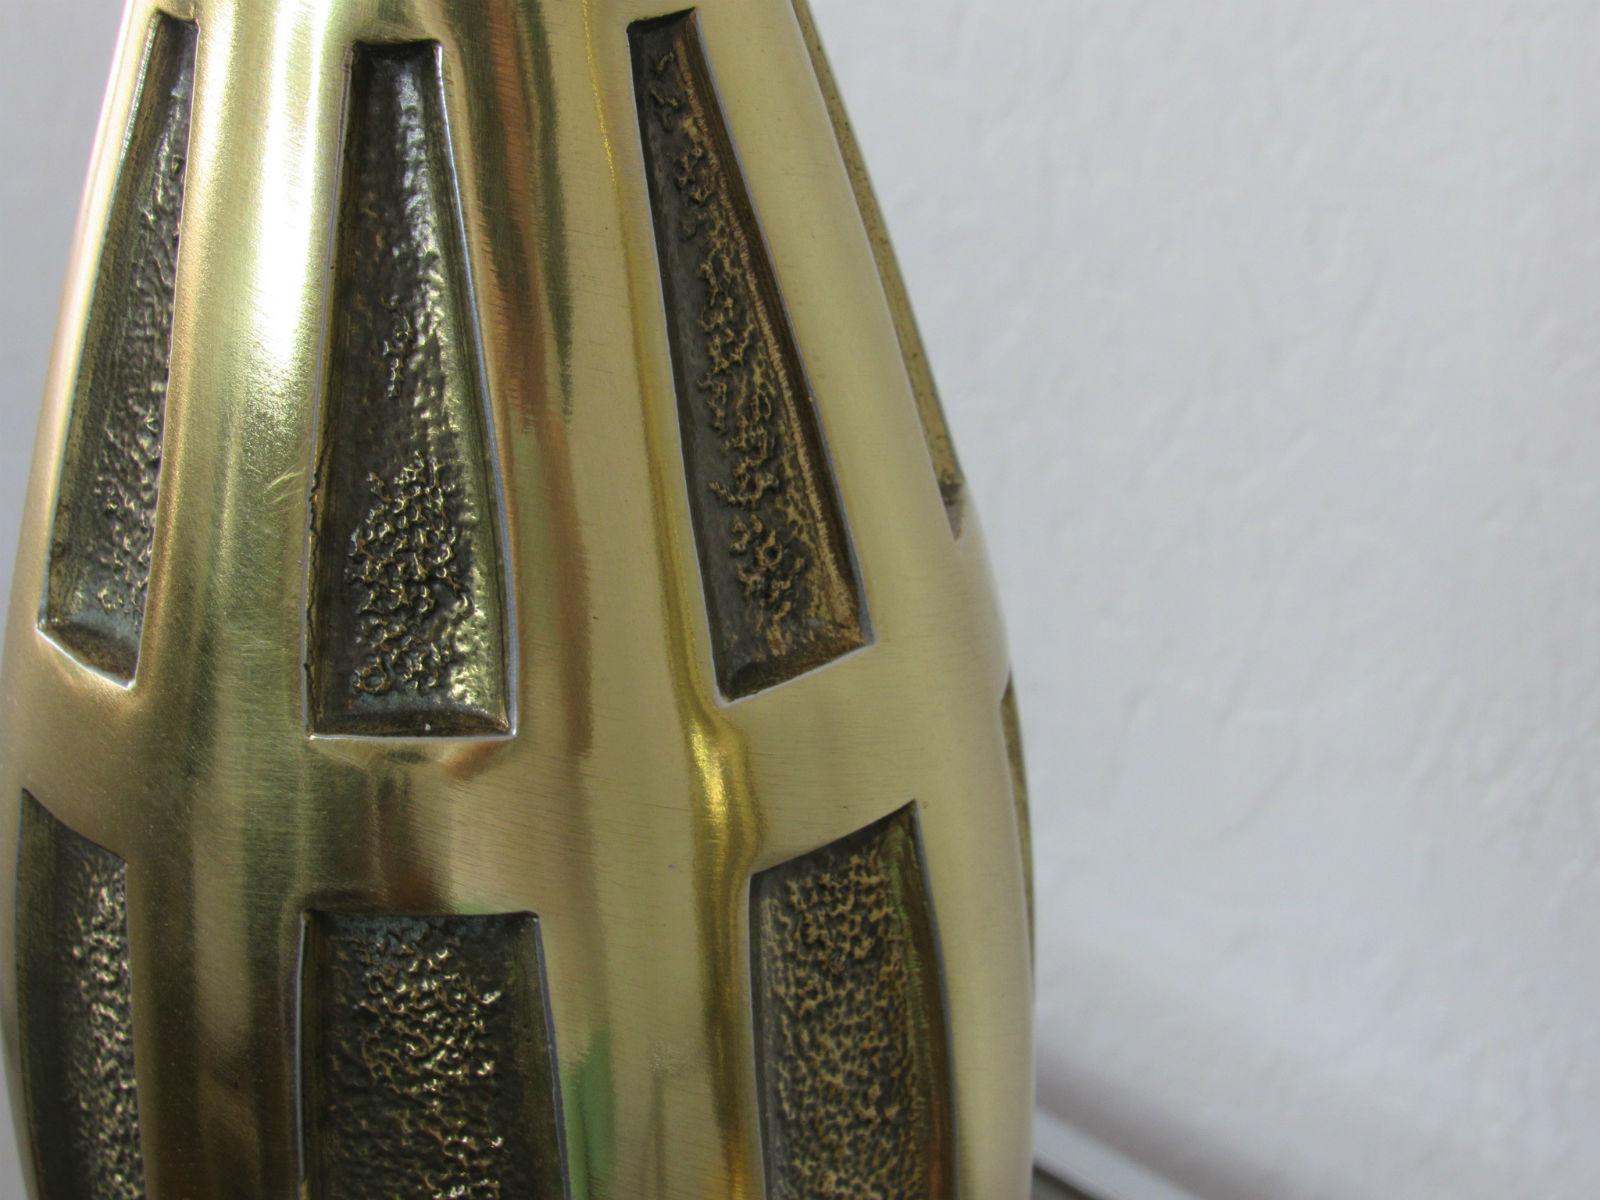 Tony Paul Midcentury Modern Brass Table Lamps In Good Condition For Sale In Surprise, AZ